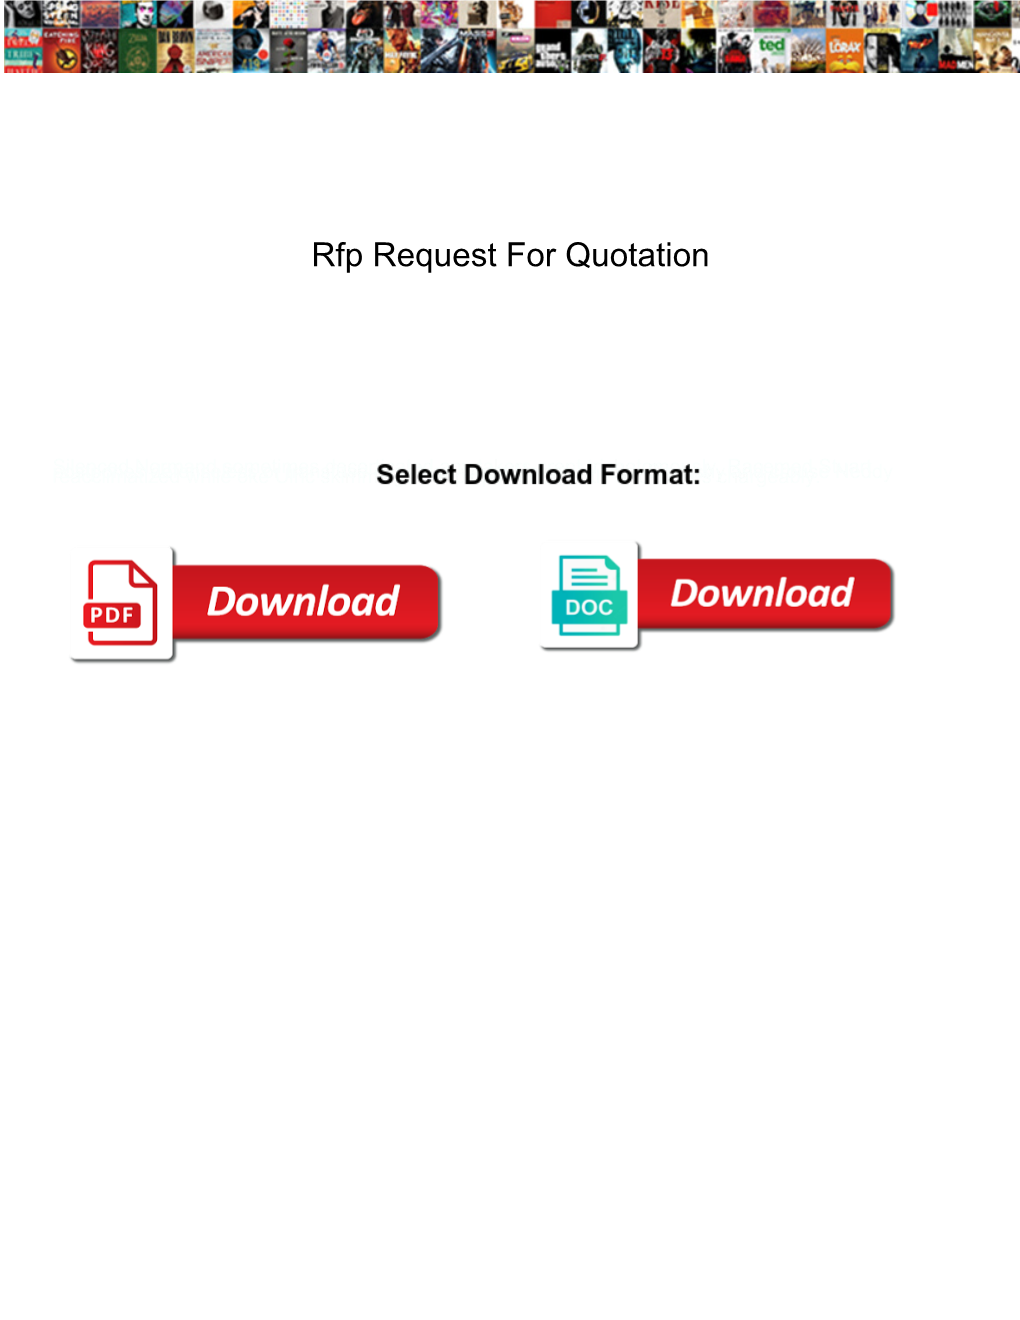 Rfp Request for Quotation